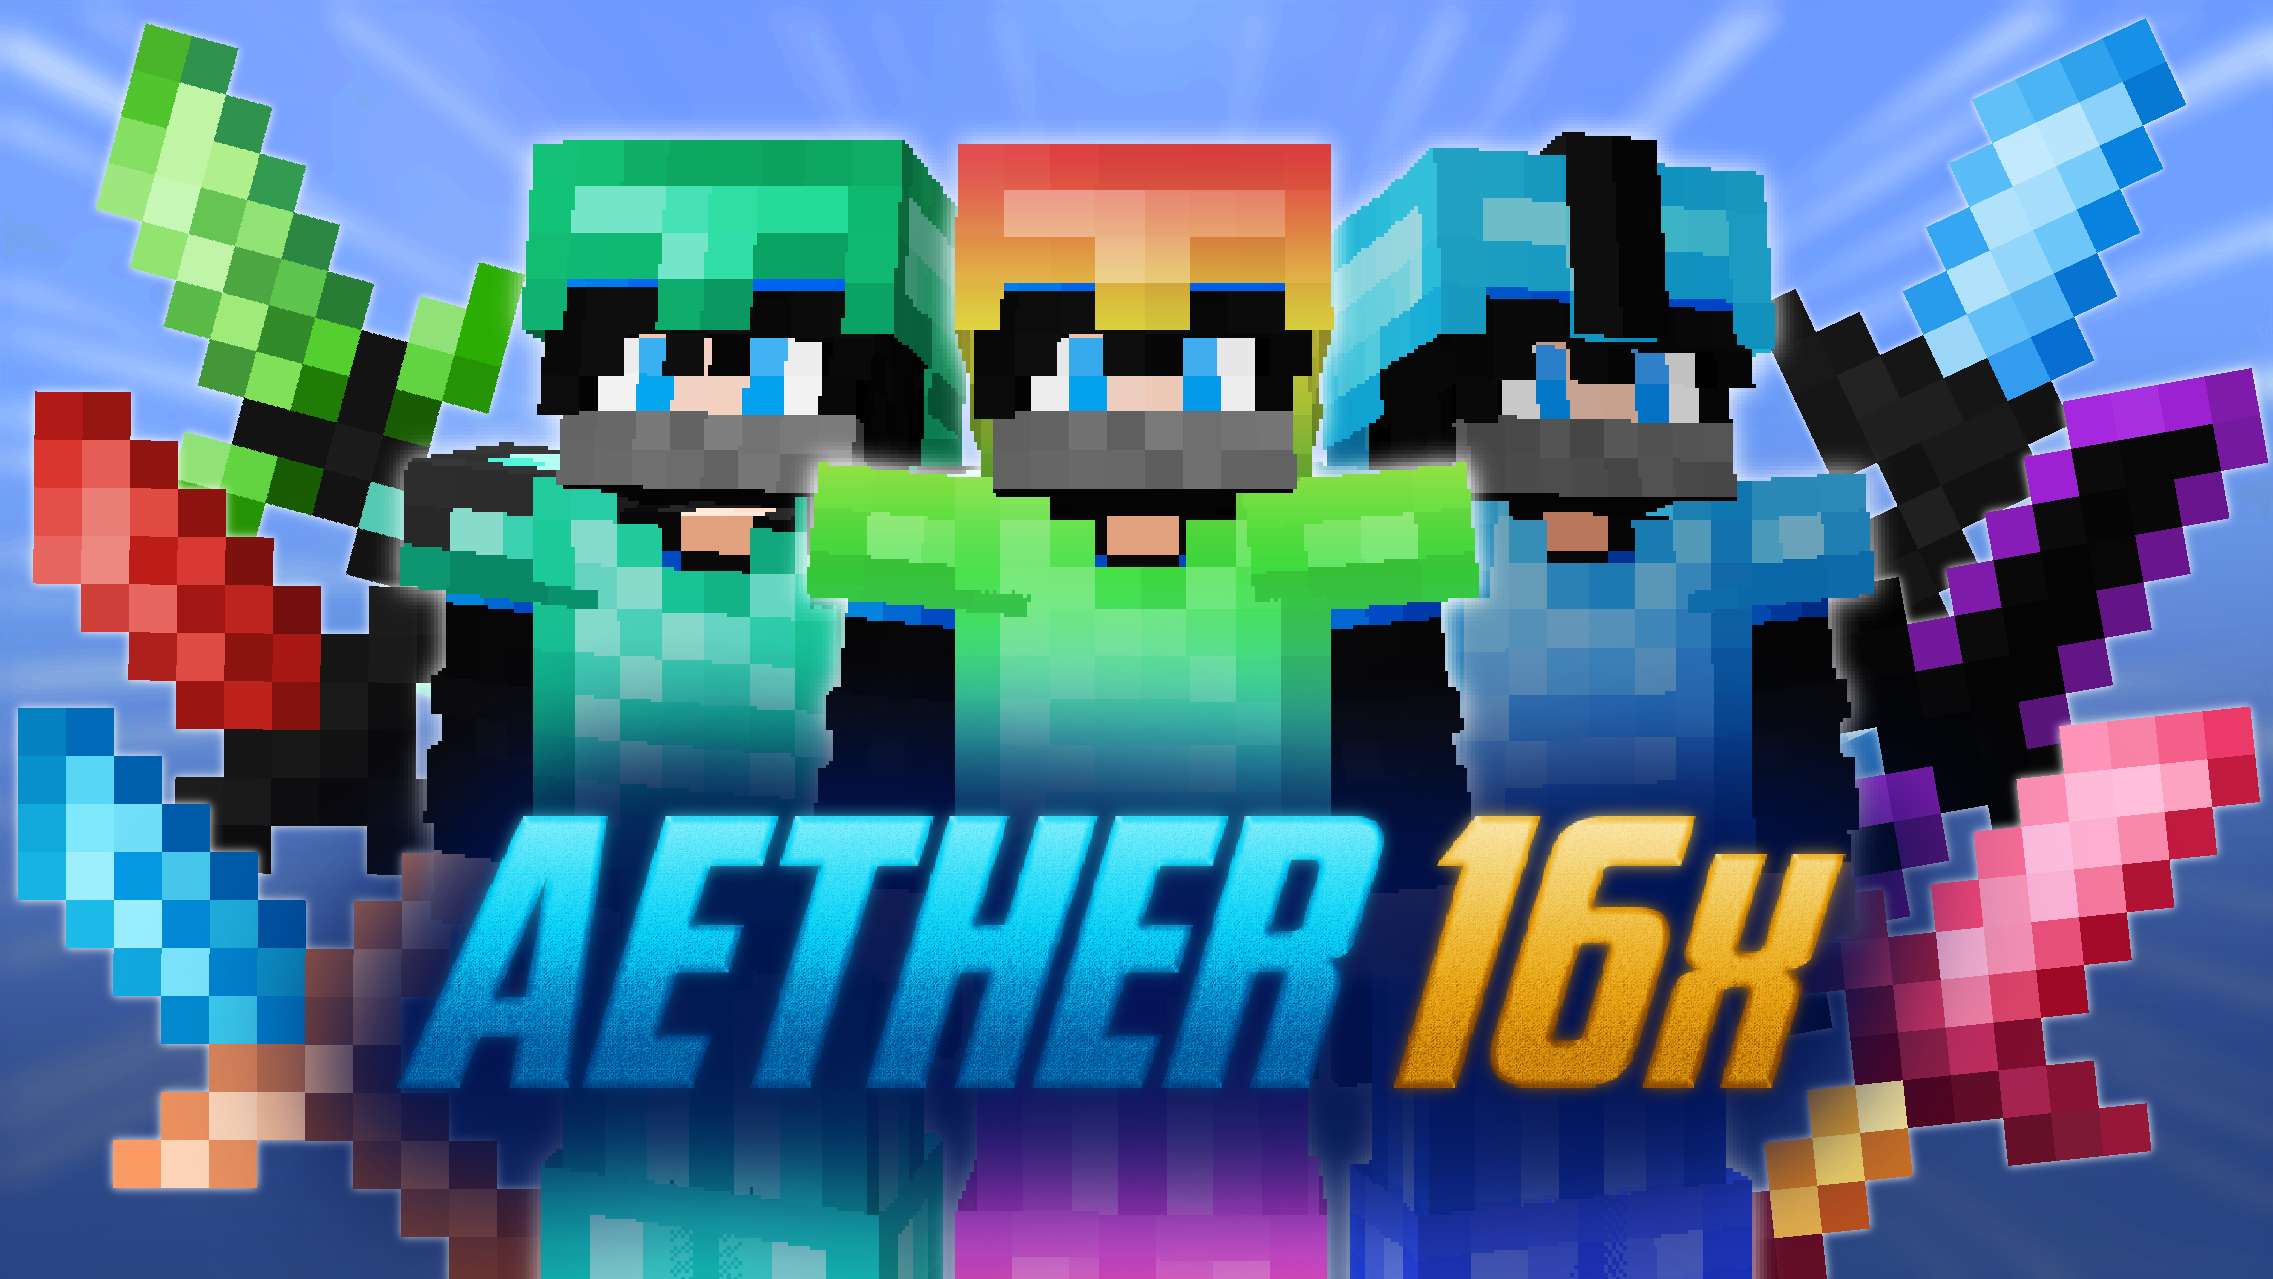 Aether 16x [sweatg0d] 16x by Mqryo on PvPRP